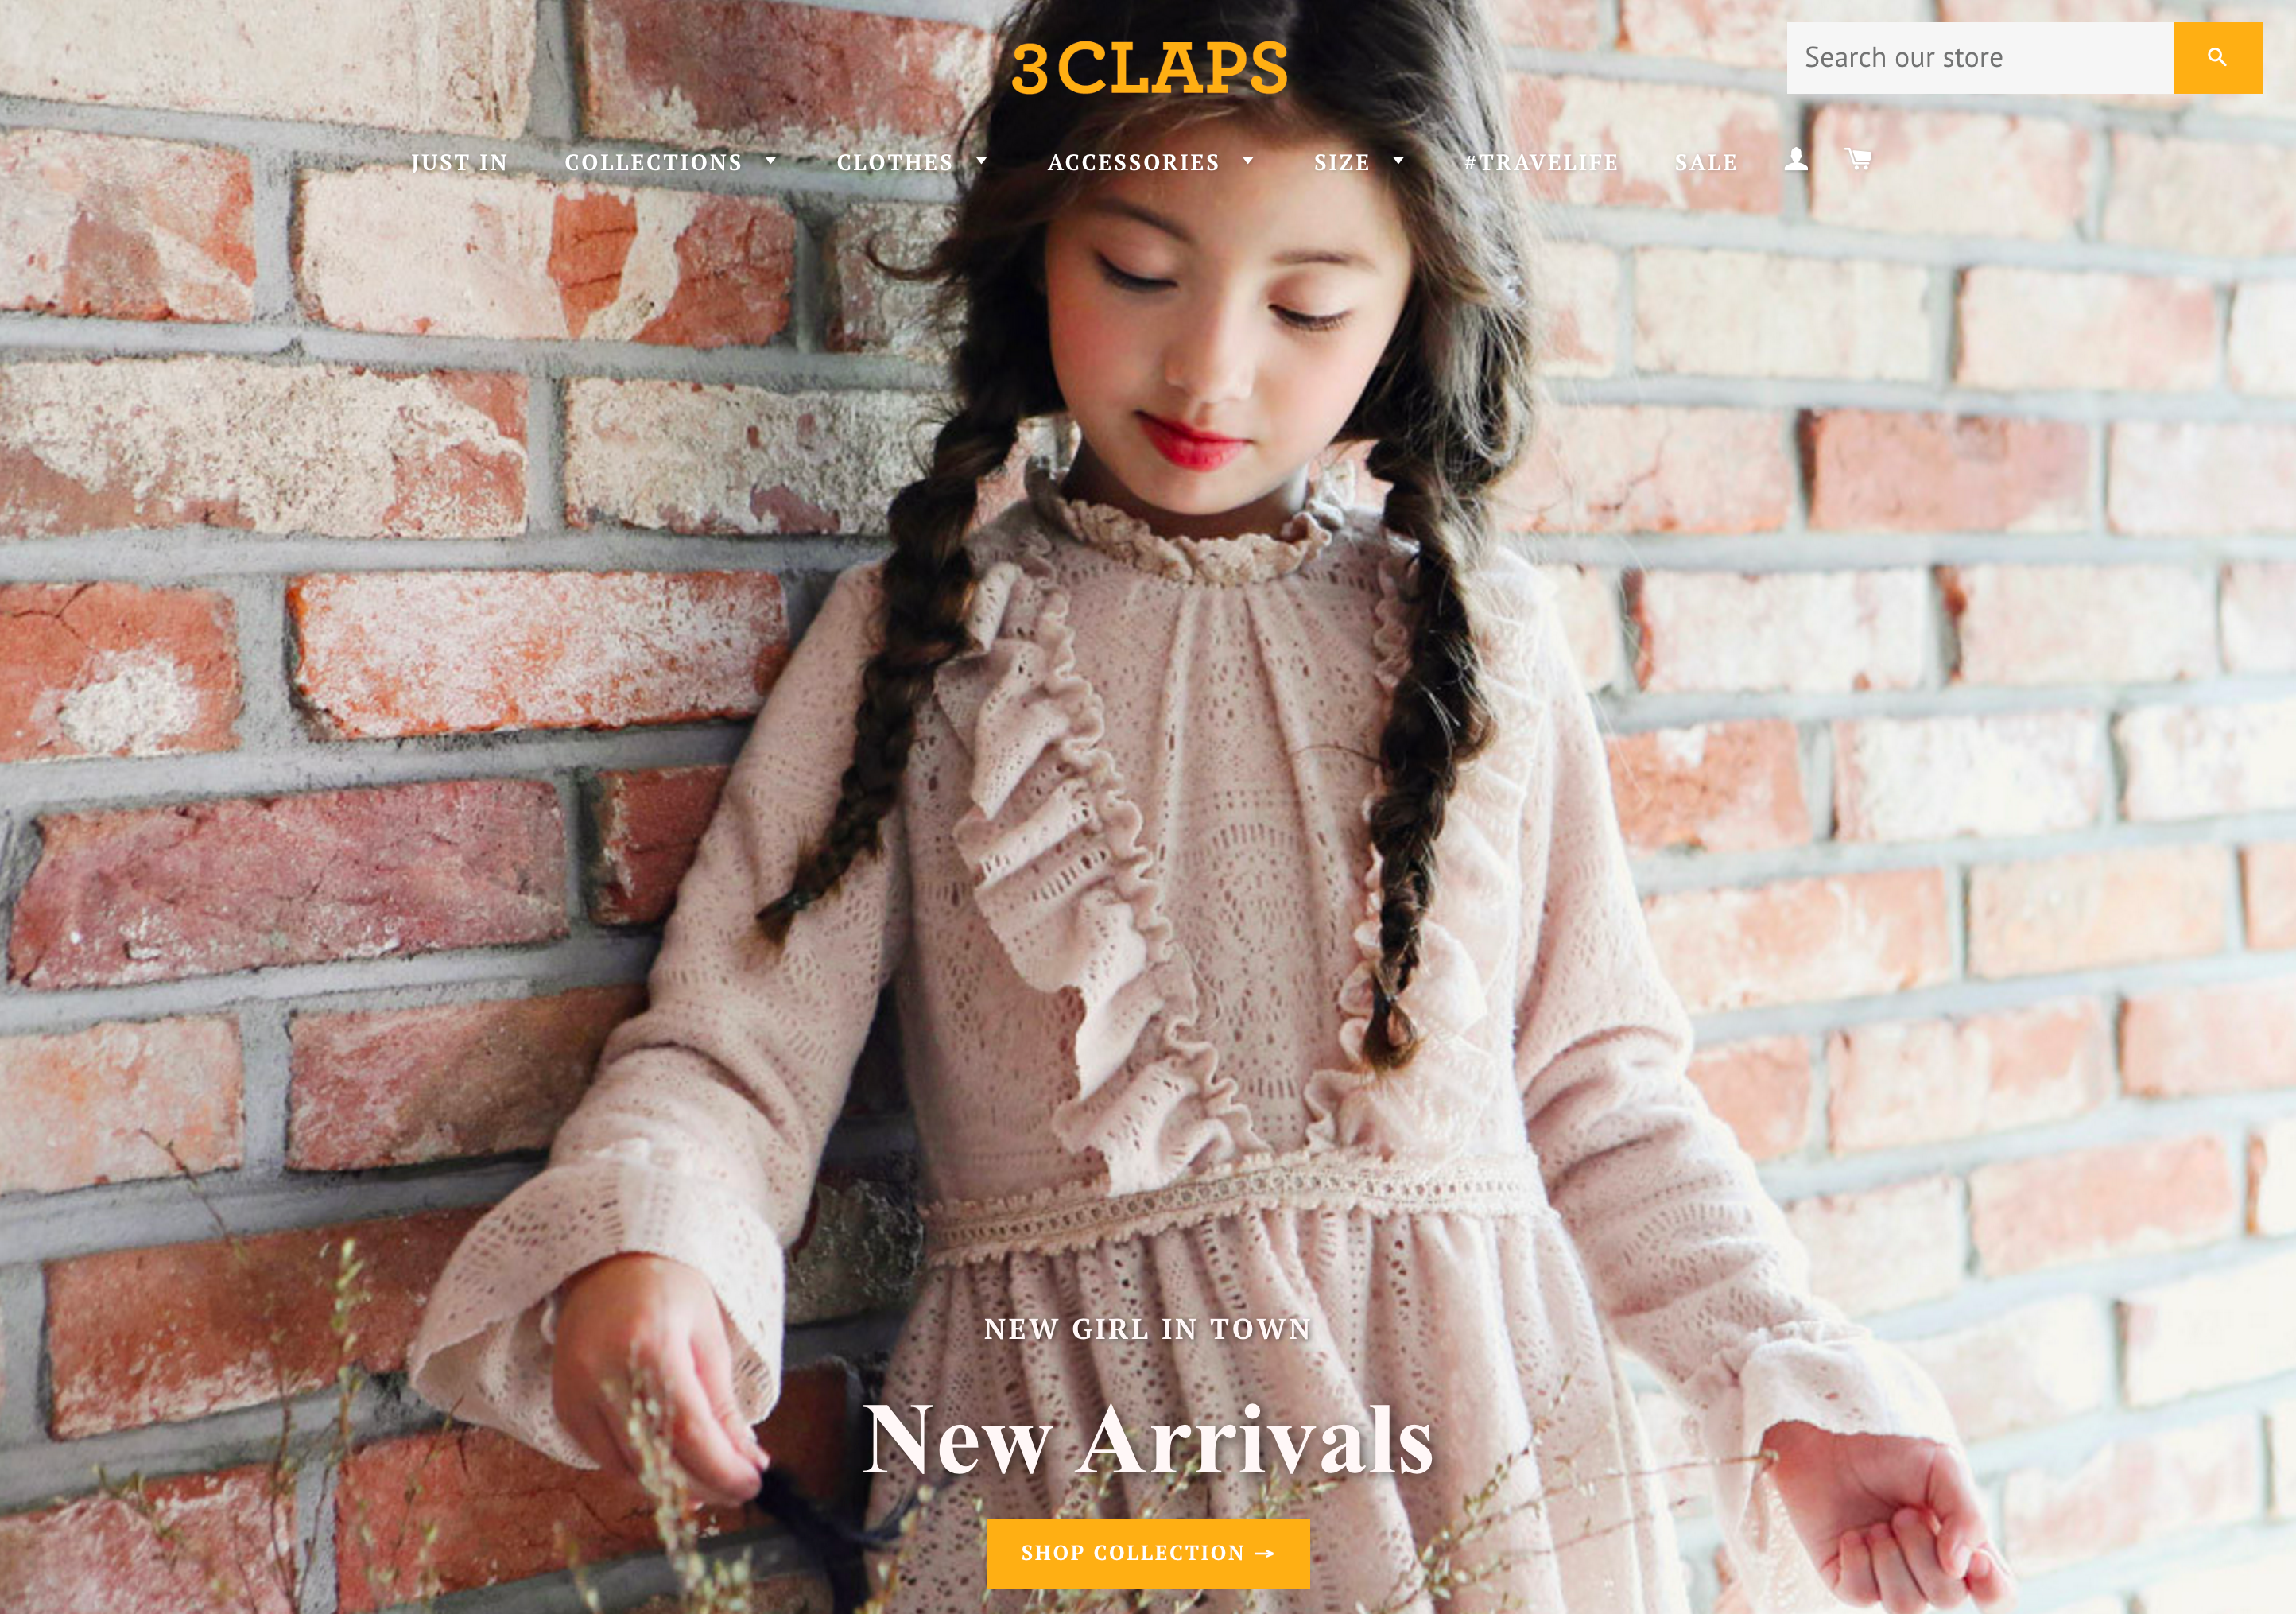 How A South Korean Entrepreneur Uses Homemade Cookies To Grow A Little Girls Fashion Brand 50% Every Month